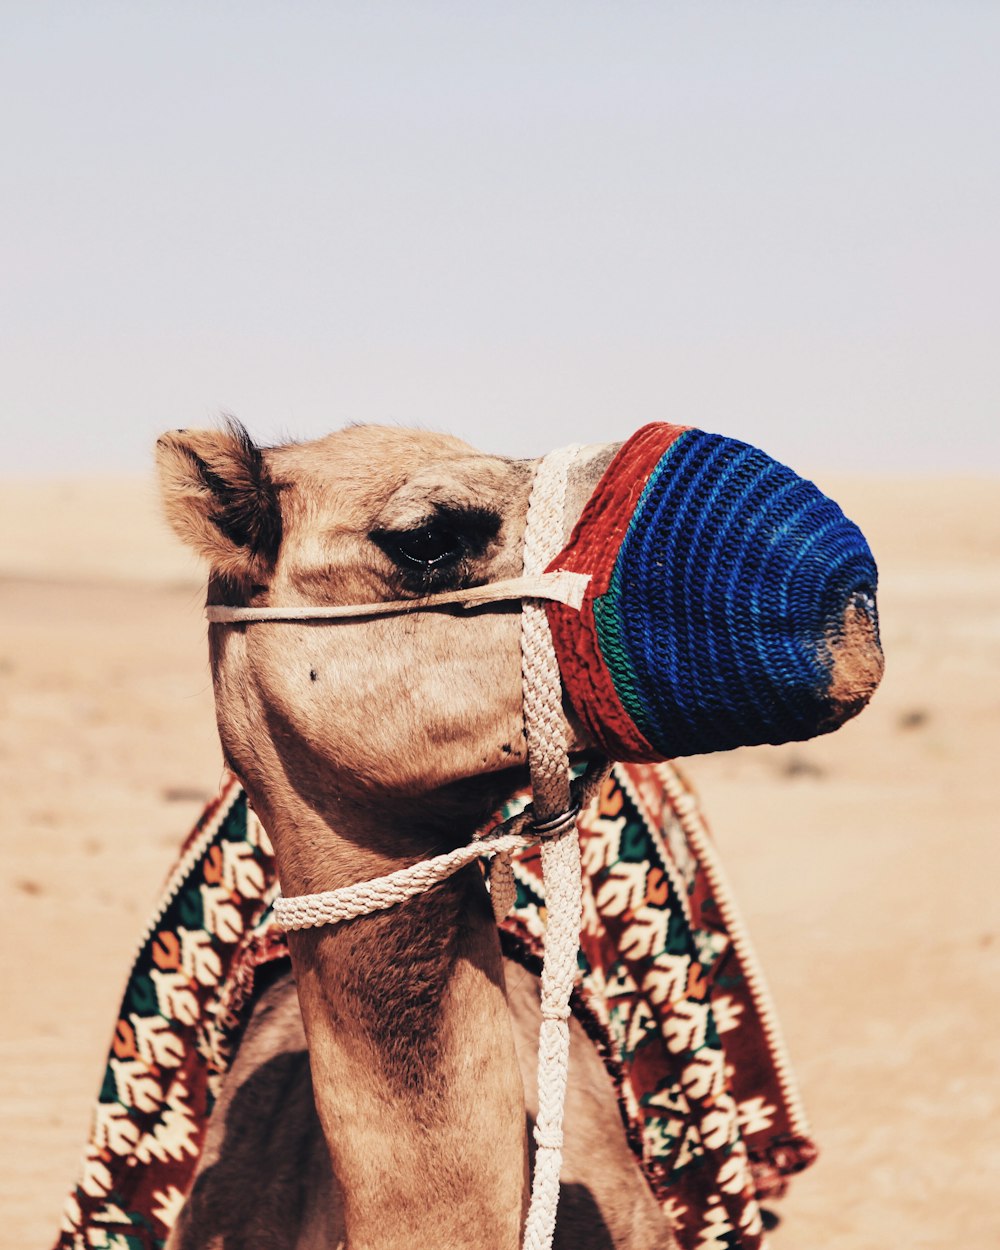 camel with blue and red mouth cover during daylight